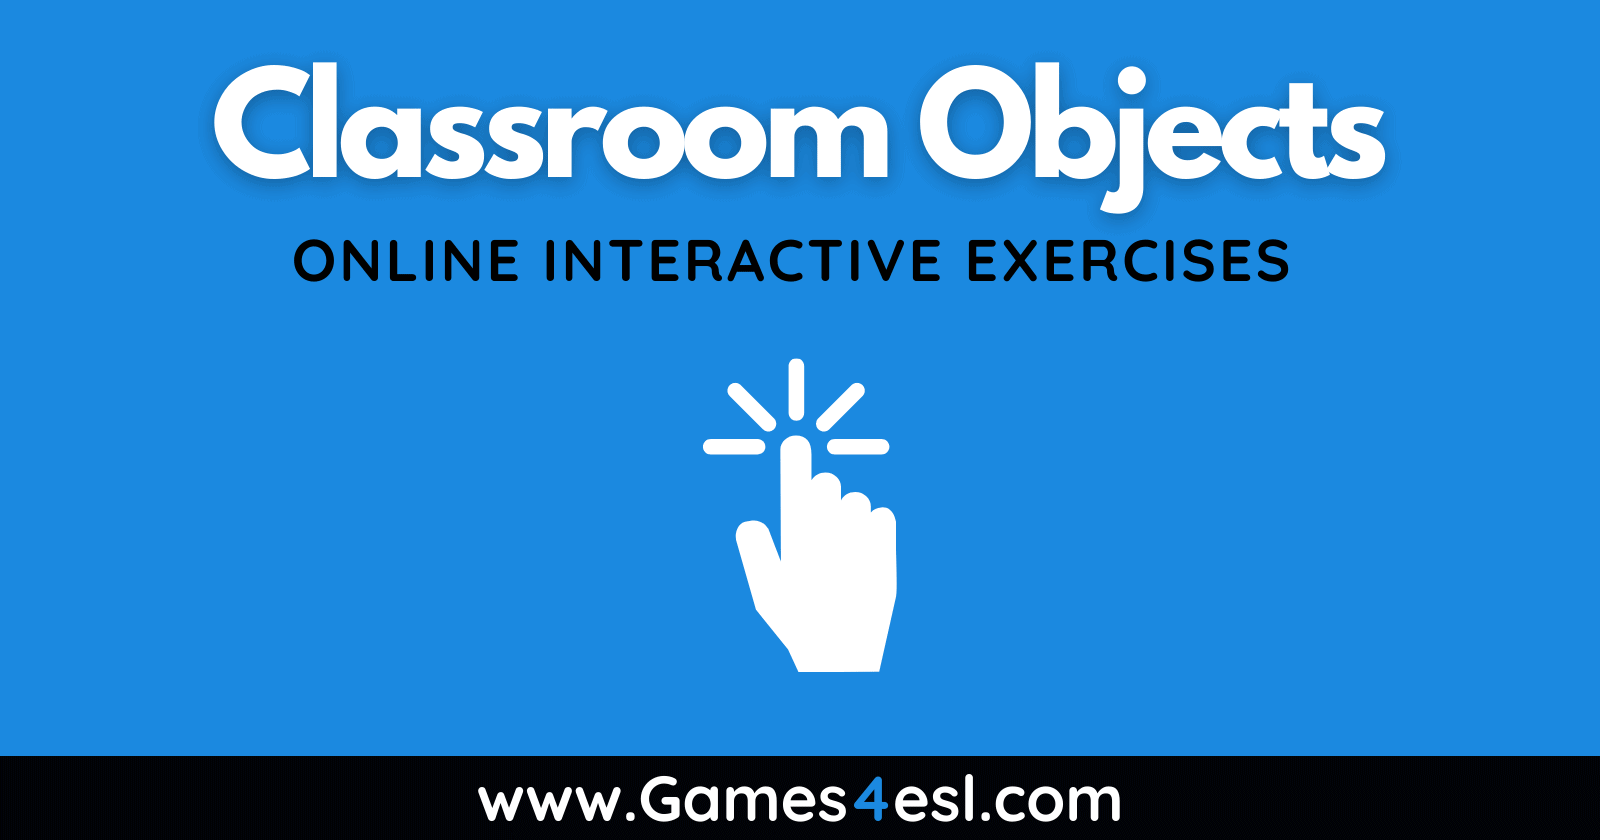 Classroom Objects Exercises